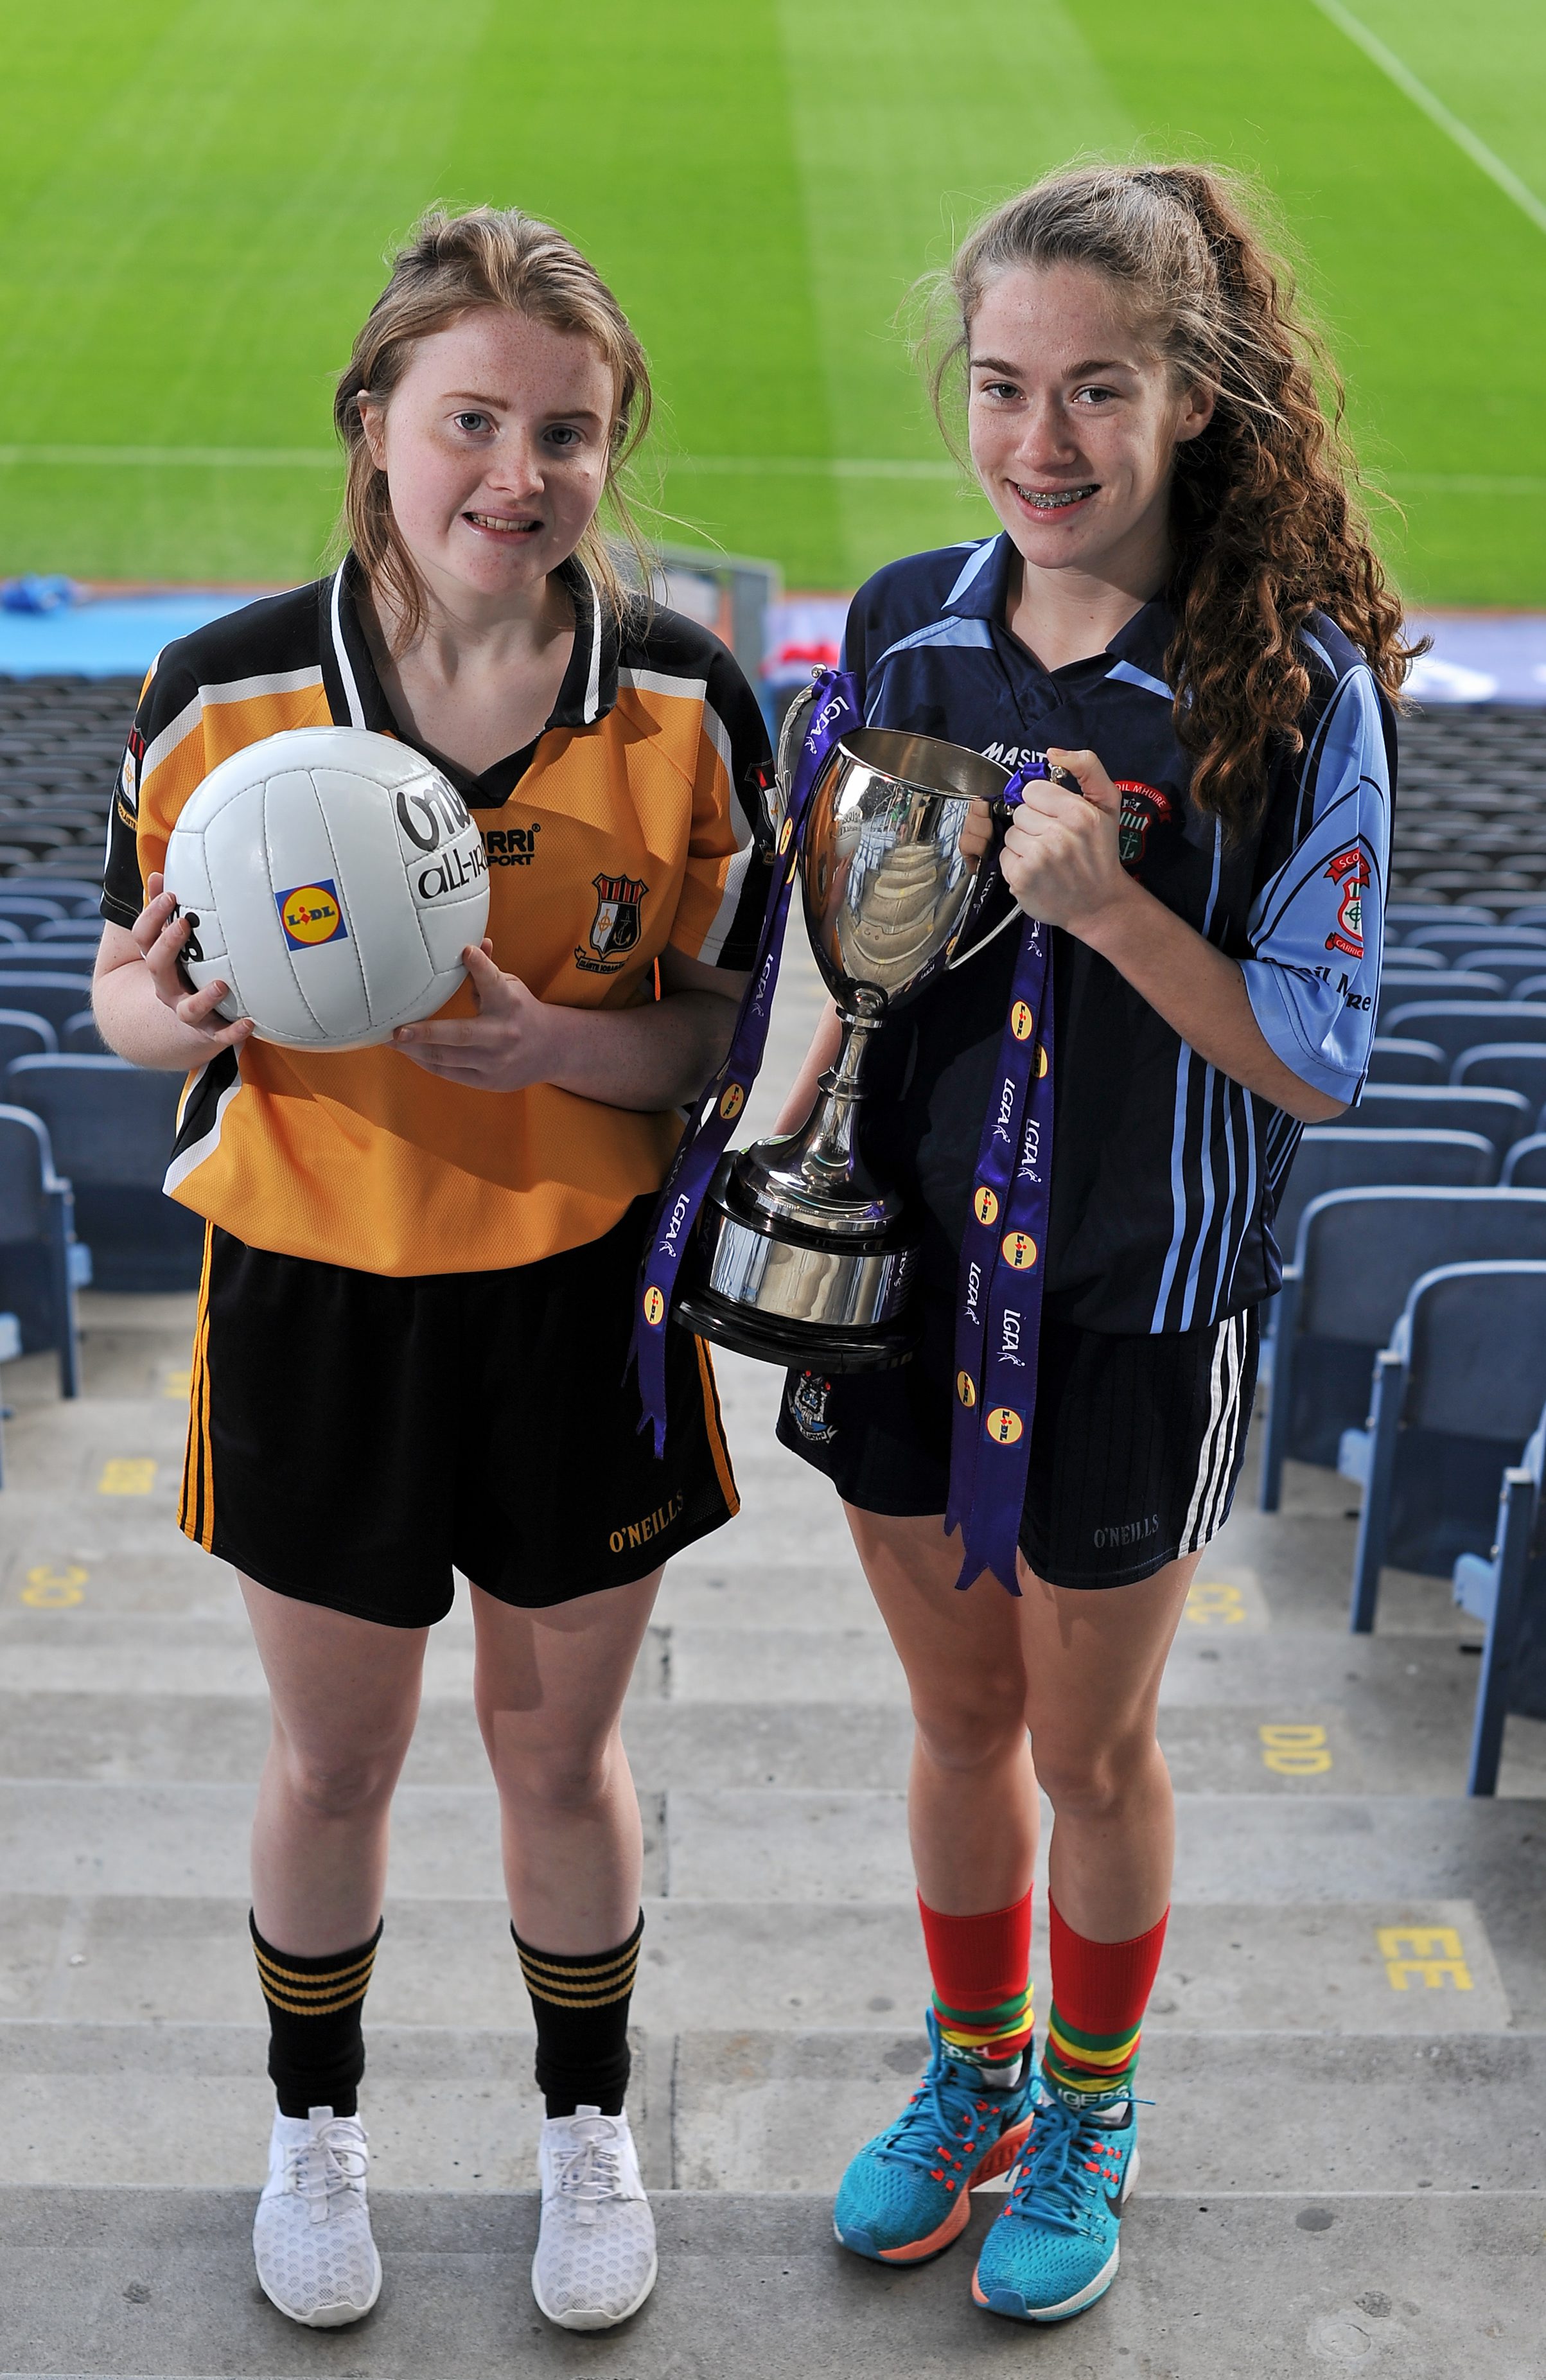 1 March 2016; The Lidl All Ireland Post Primary Schools Finals were launched today at Croke Park. The finals will be contested at Senior and Junior level with 3 finals at each grade. Scoil Mhuire, Carrick on Suir, Tipperary, will meet the 2014 Champions, Coláiste Íosagáin in the Lidl PPS Senior A All Ireland Final. John the Baptist from Limerick will meet Holy Rosary College from Mountbellew in Galway in the Senior B Final with Gallen C.S Ferbane taking on Scoil Phobail Sliabh Luachra from Kerry in the Senior C final. The Lidl PPS All Ireland Junior A Final will see Scoil Críost Rí from Portlaoise meeting St. Ronans College from Armagh. Killorglin from Kerry will meet the Presentation College from Tuam in the Lidl Junior B PPS All Ireland Final and Scoil Phobal Sliabh Luachra, Kerry, will meet Mercy S.S from Ballymahon in Longford in the Junior C decider. Full details for the finals including venues and throw in times are available from www.ladiesgaelic.ie. Pictured are Meave Phelan, Scoil Chríost Rí, Portlaoise, Co. Laois, and Megan McCann, St Ronan's College Lurgan, Co. Armagh. Croke Park, Dublin. Picture credit: Sam Barnes / SPORTSFILE *** NO REPRODUCTION FEE ***